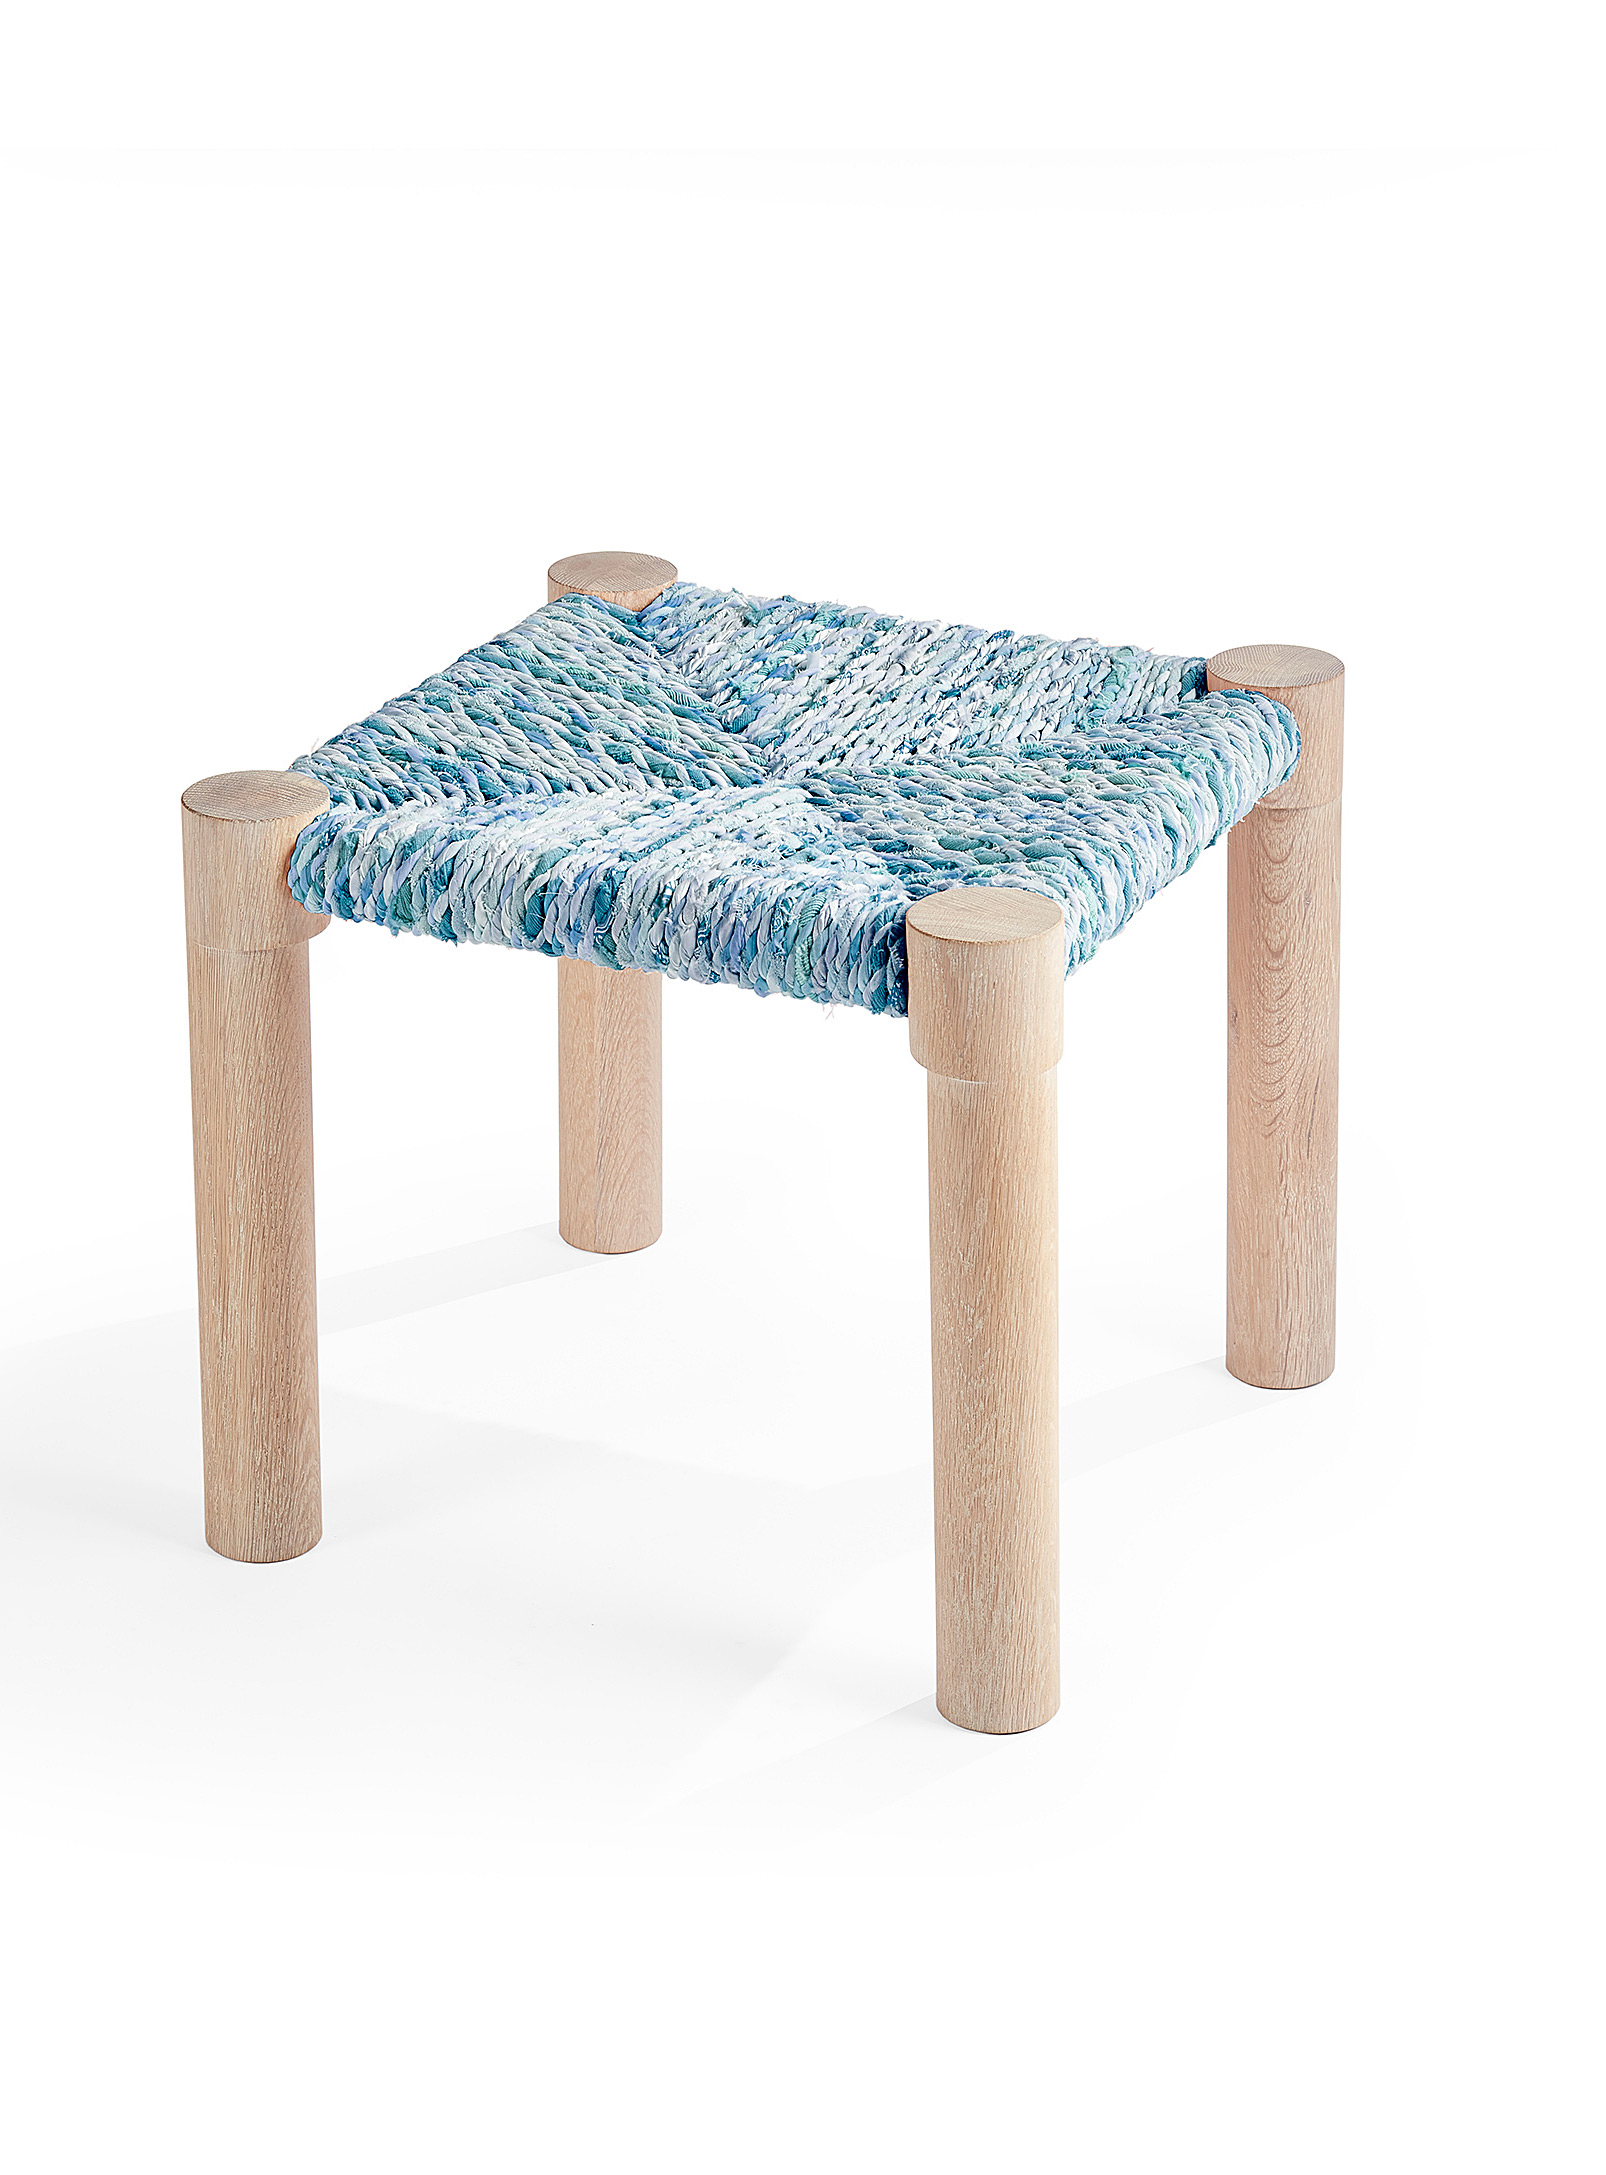 Coolican & Company Calla Stool In Baby Blue